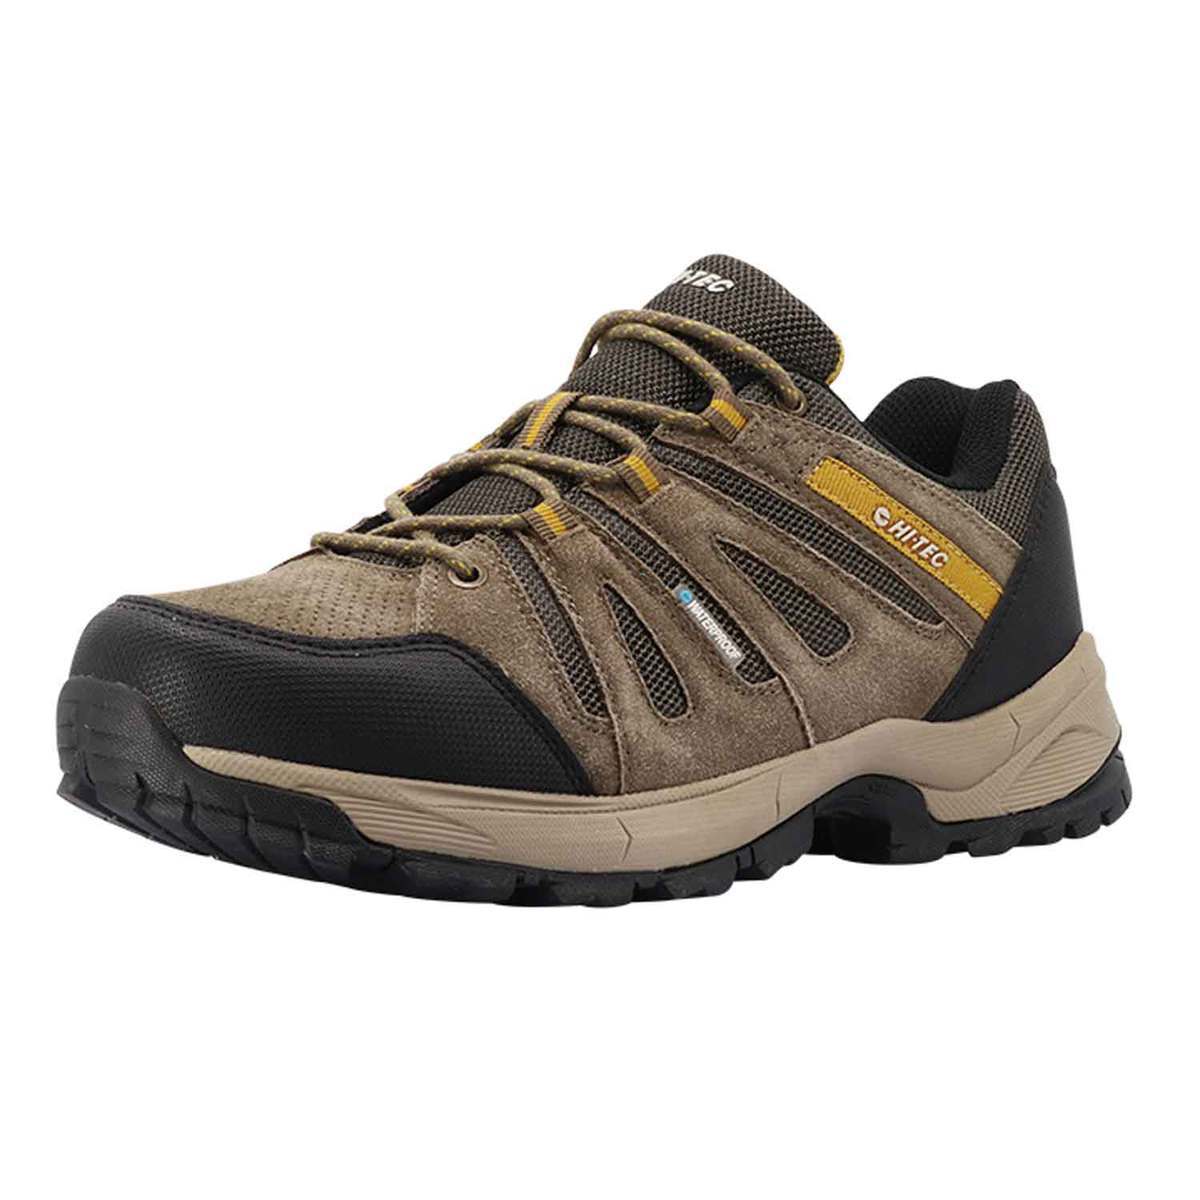 Hi-Tec Men's Canvey Waterproof Low Hiking Shoes - Taupe - Size 11.5 ...